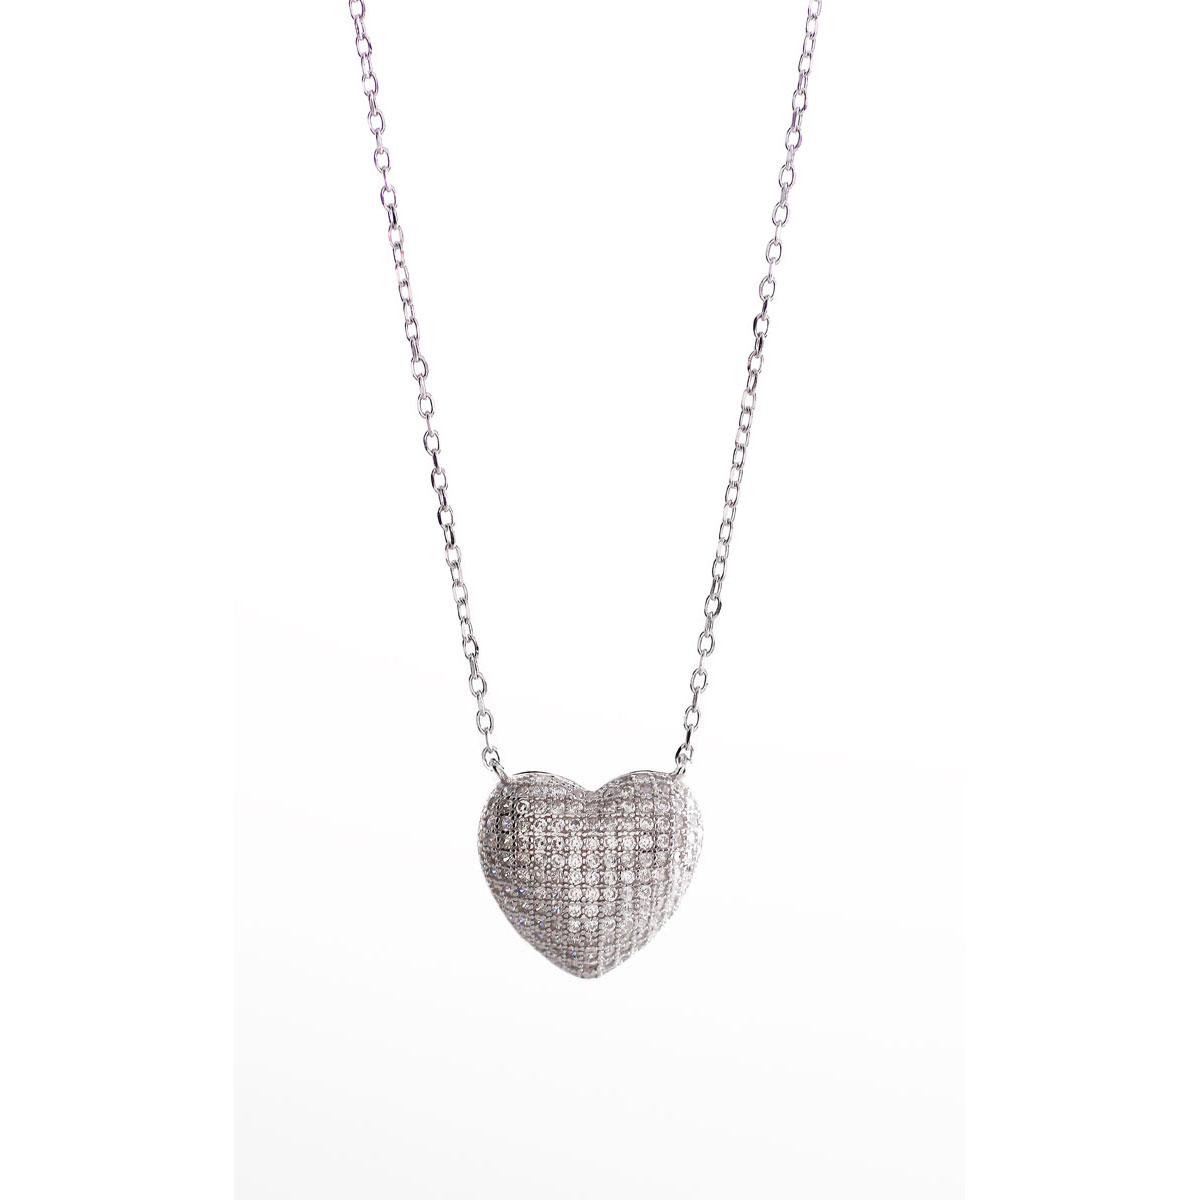 Cashs Ireland, Crystal Pave Sterling Silver Heart Pendant Necklace